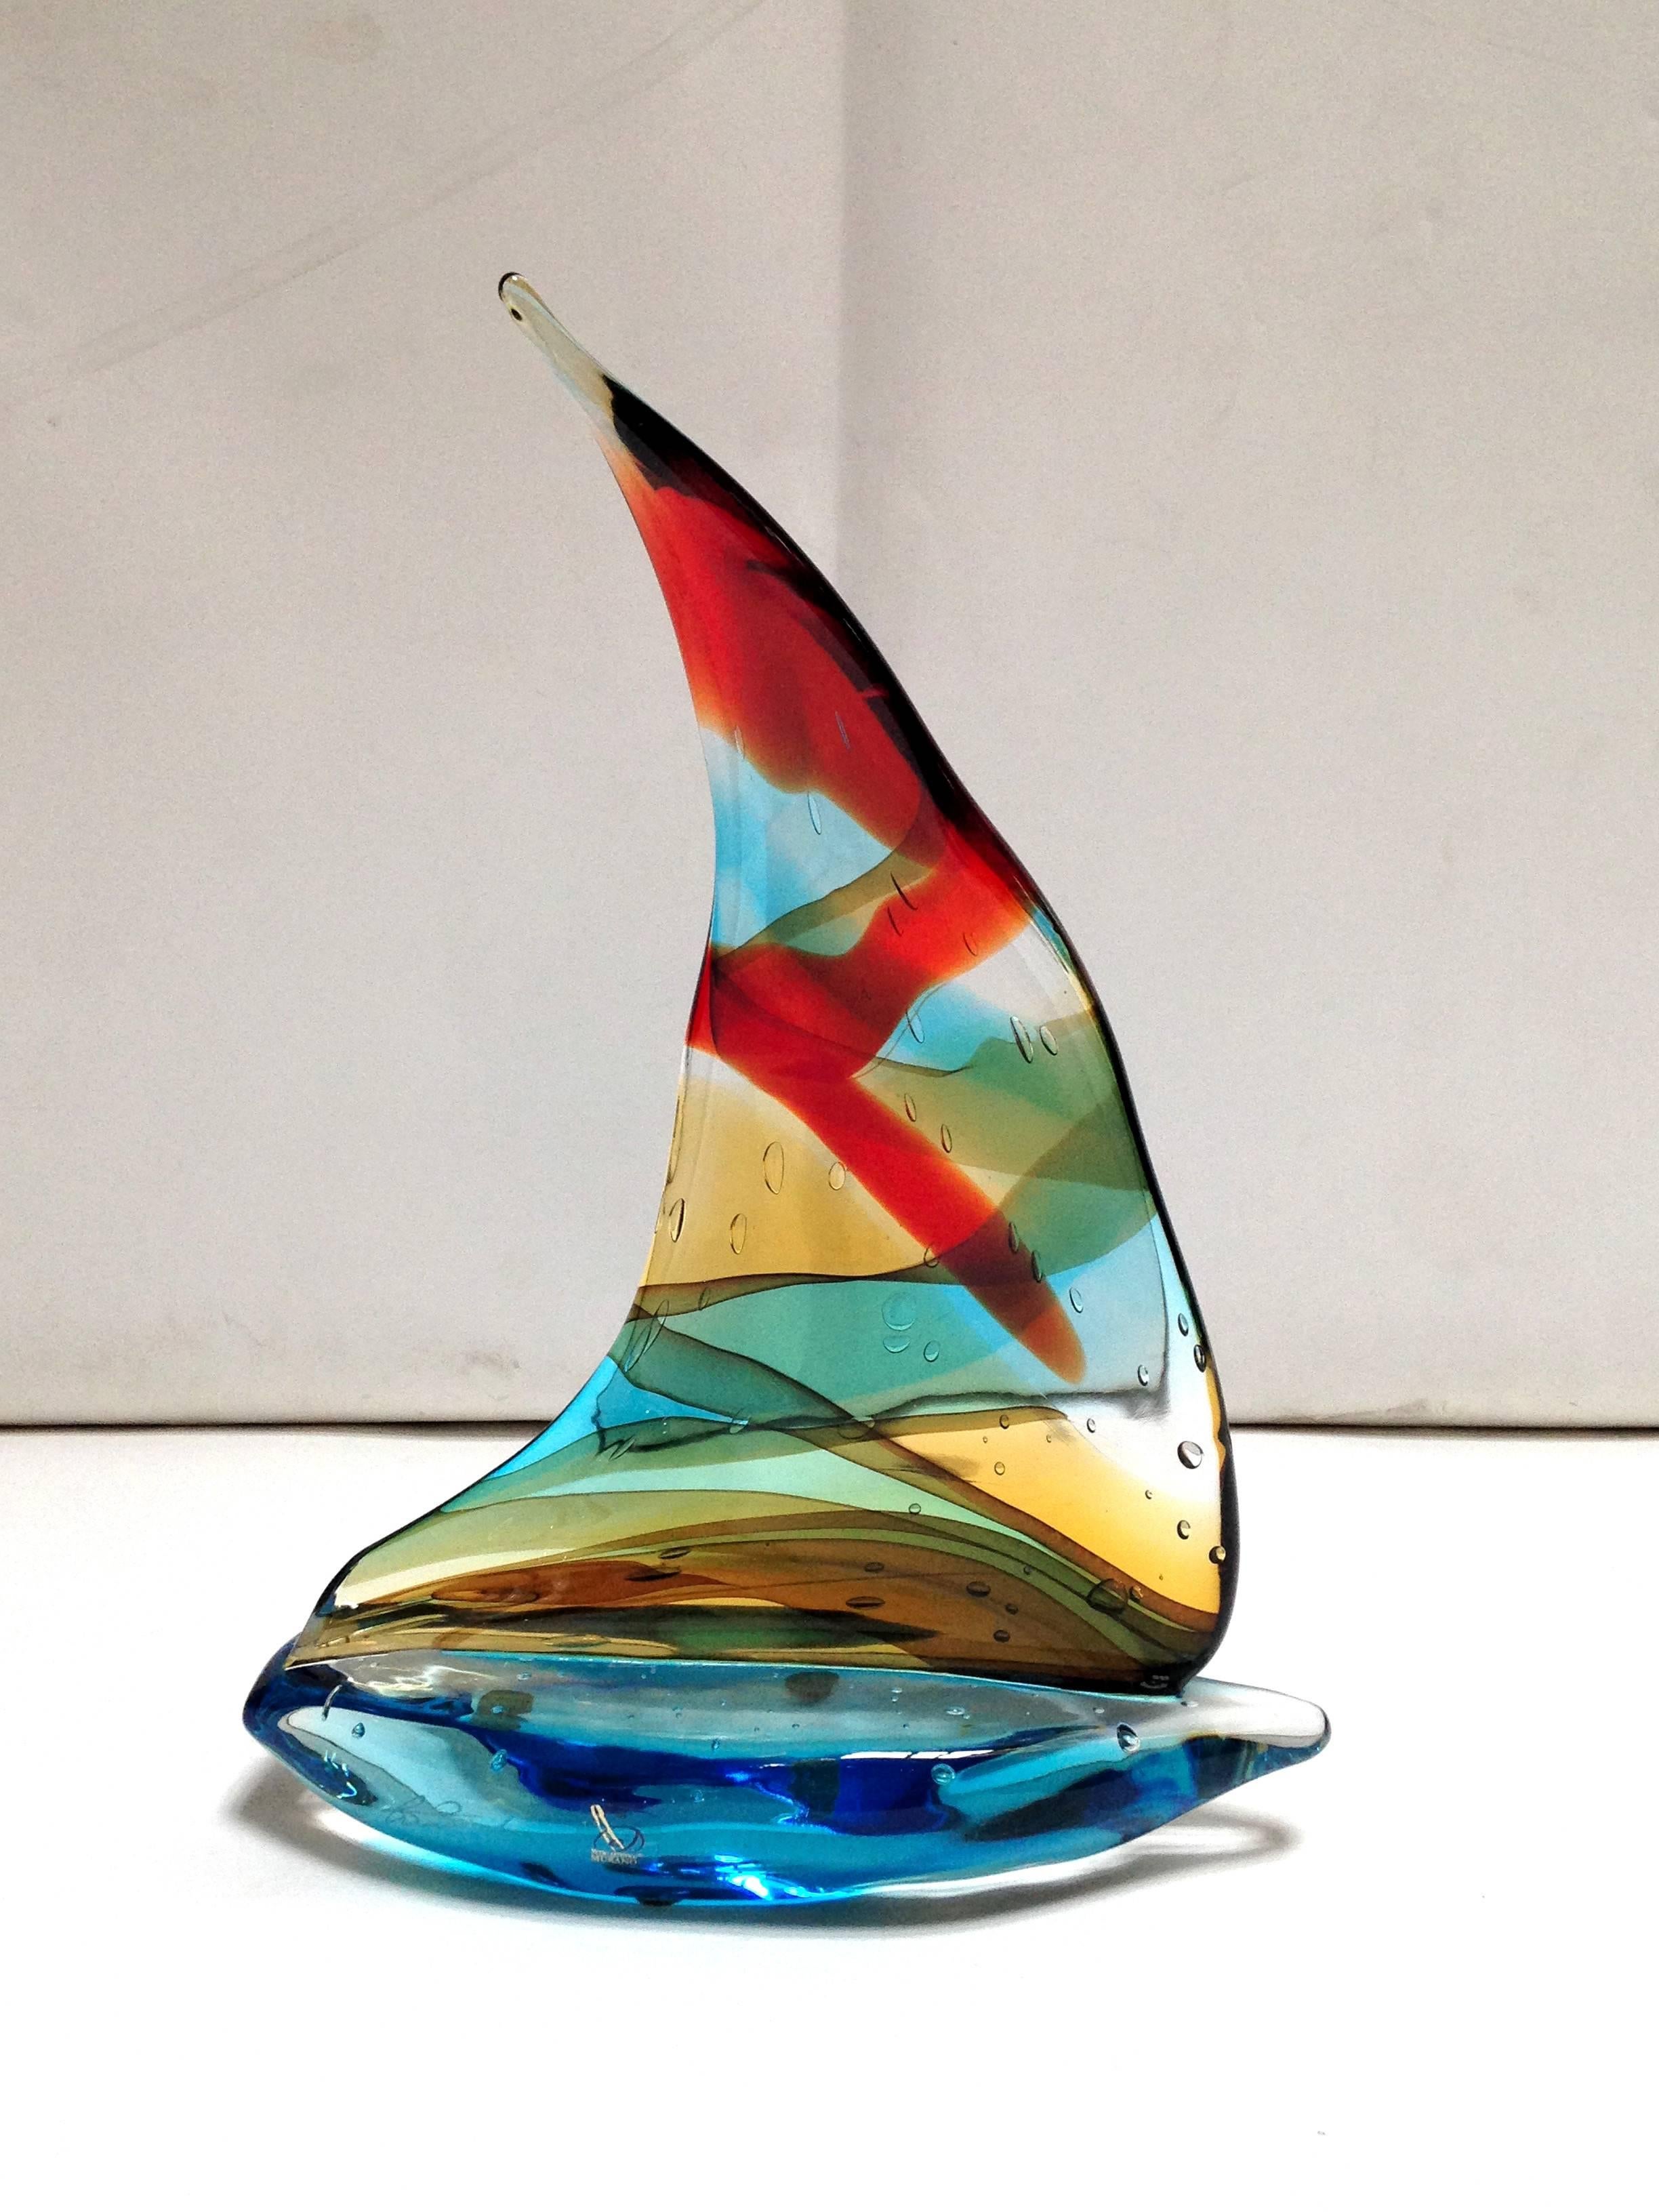 Italian vintage single sail boat hand blown and crafted in multiple colors of Murano glass by Sergio Constantini, signed on the base / Made in Italy in the 1960’s
Depth: 3.5 inches / Width: 10 inches / Height: 14 inches
1 in stock in Palm Springs